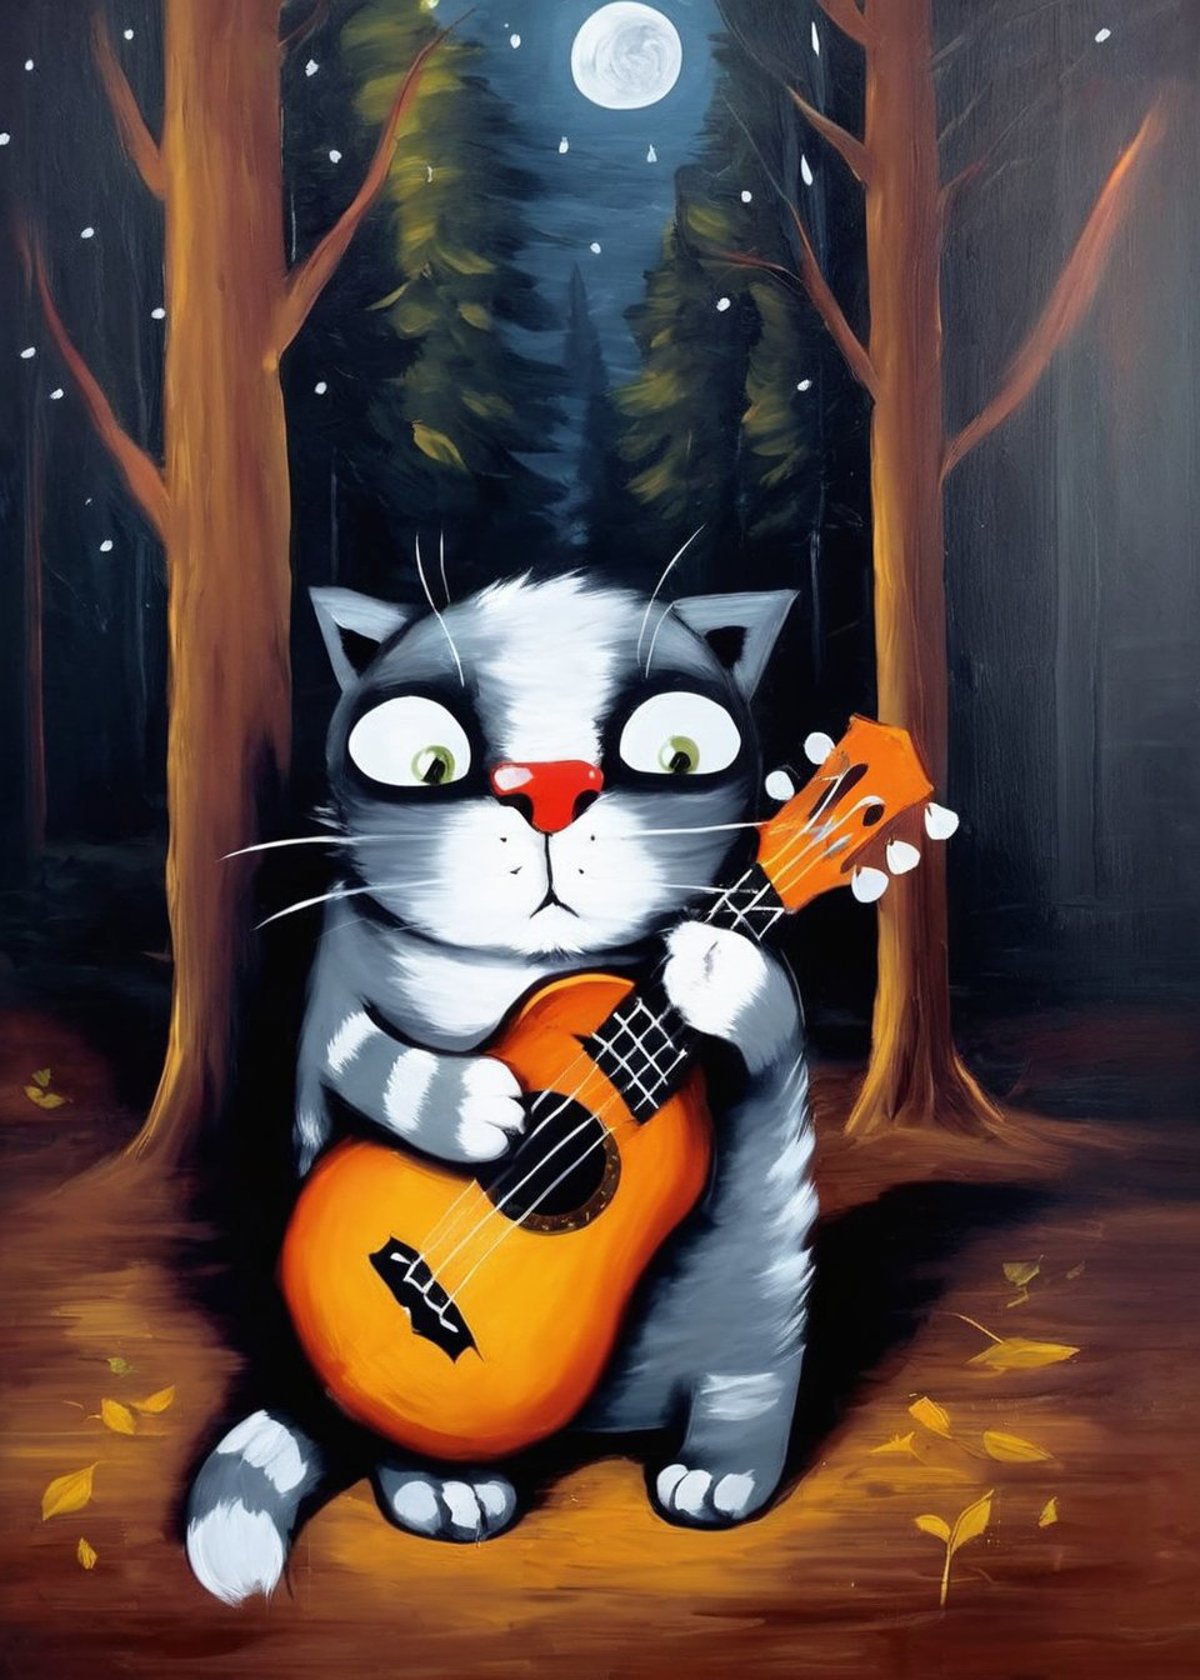 A cat holding a guitar in a forest setting.